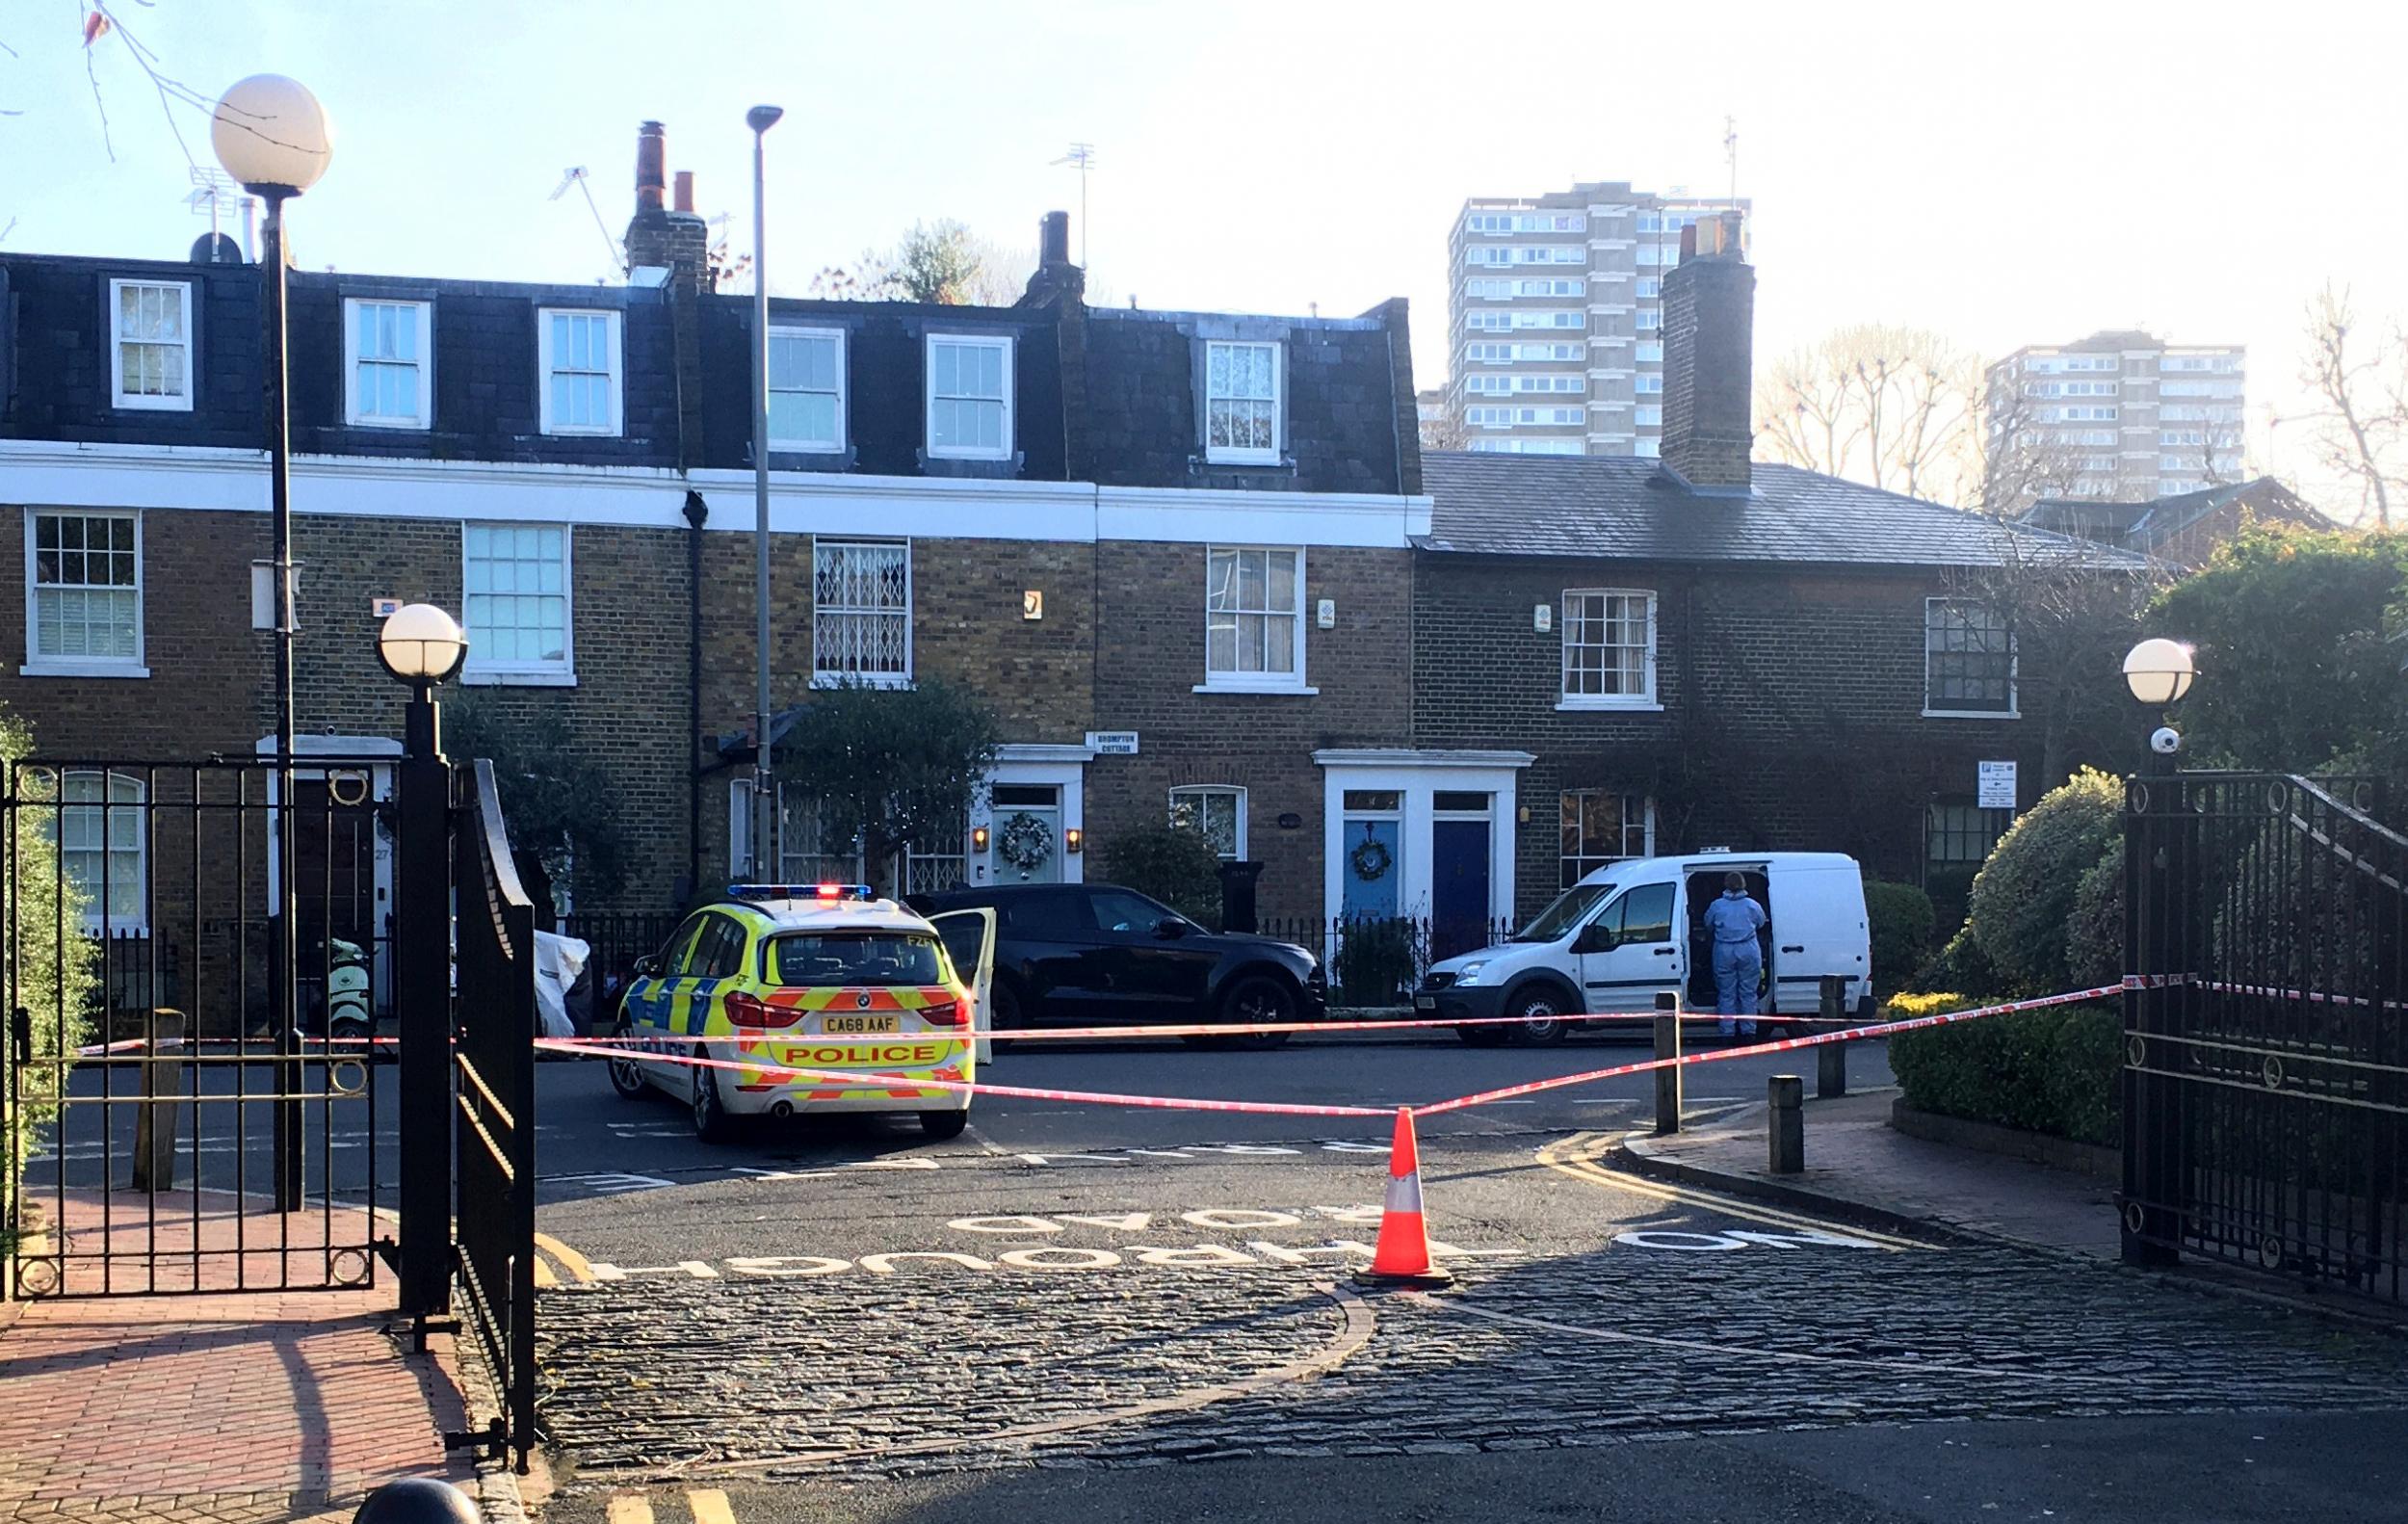 The shooting happened on Battersea Church Road in southwest London